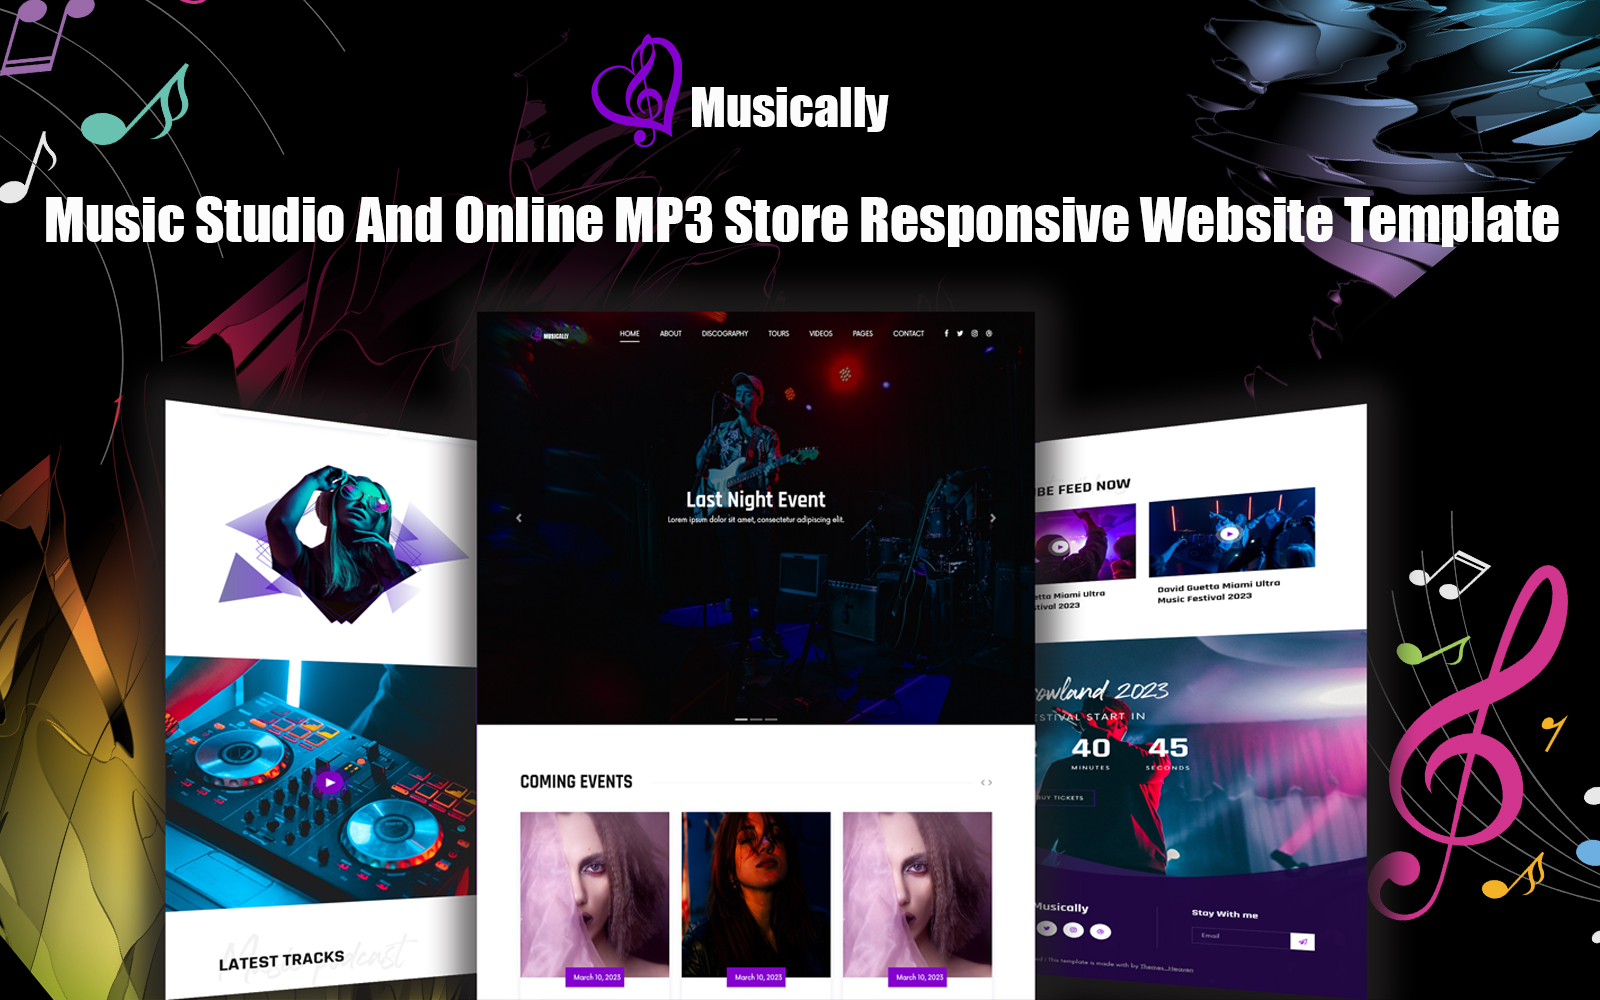 Musically - Music Studio And Online MP3 Store Responsive Website Template.